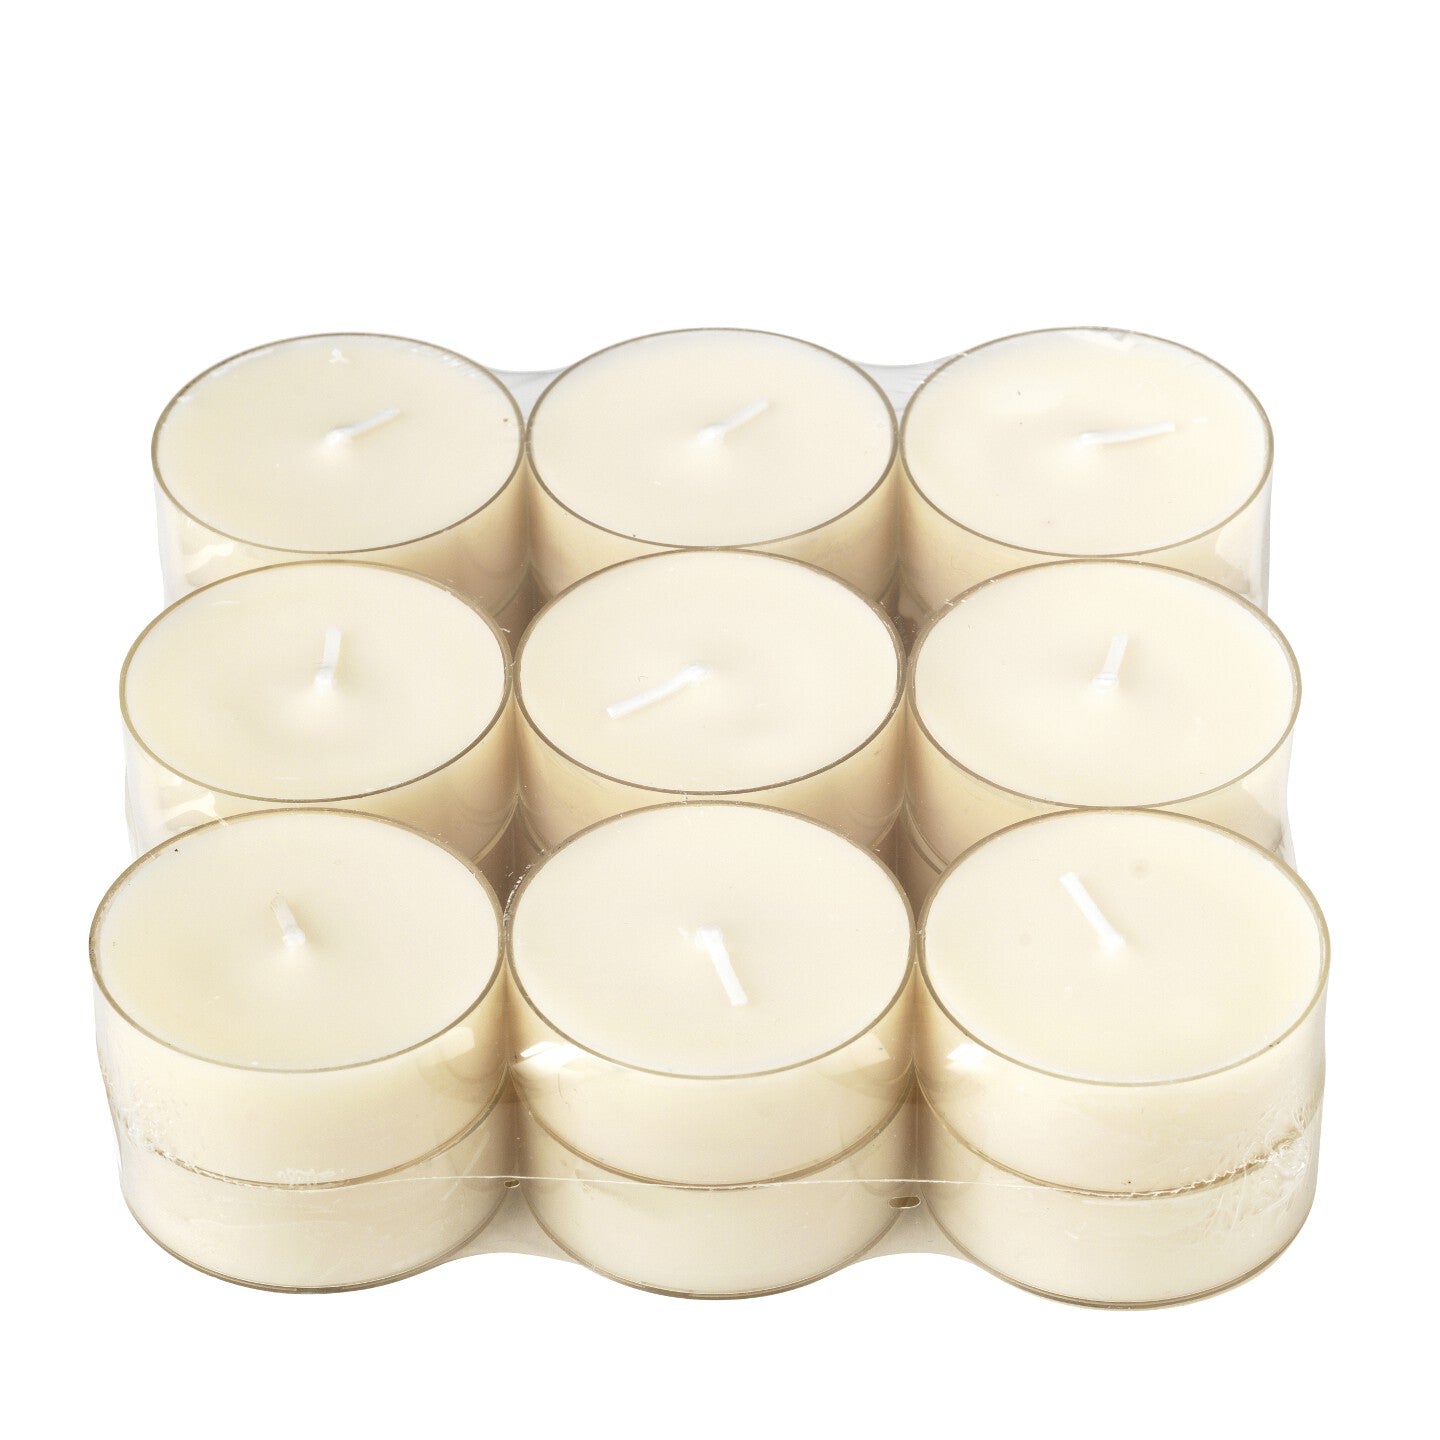 Blomus Tealight Candles with 8 Hour Burn Time: Large 5.5cm LUCE Set of 18